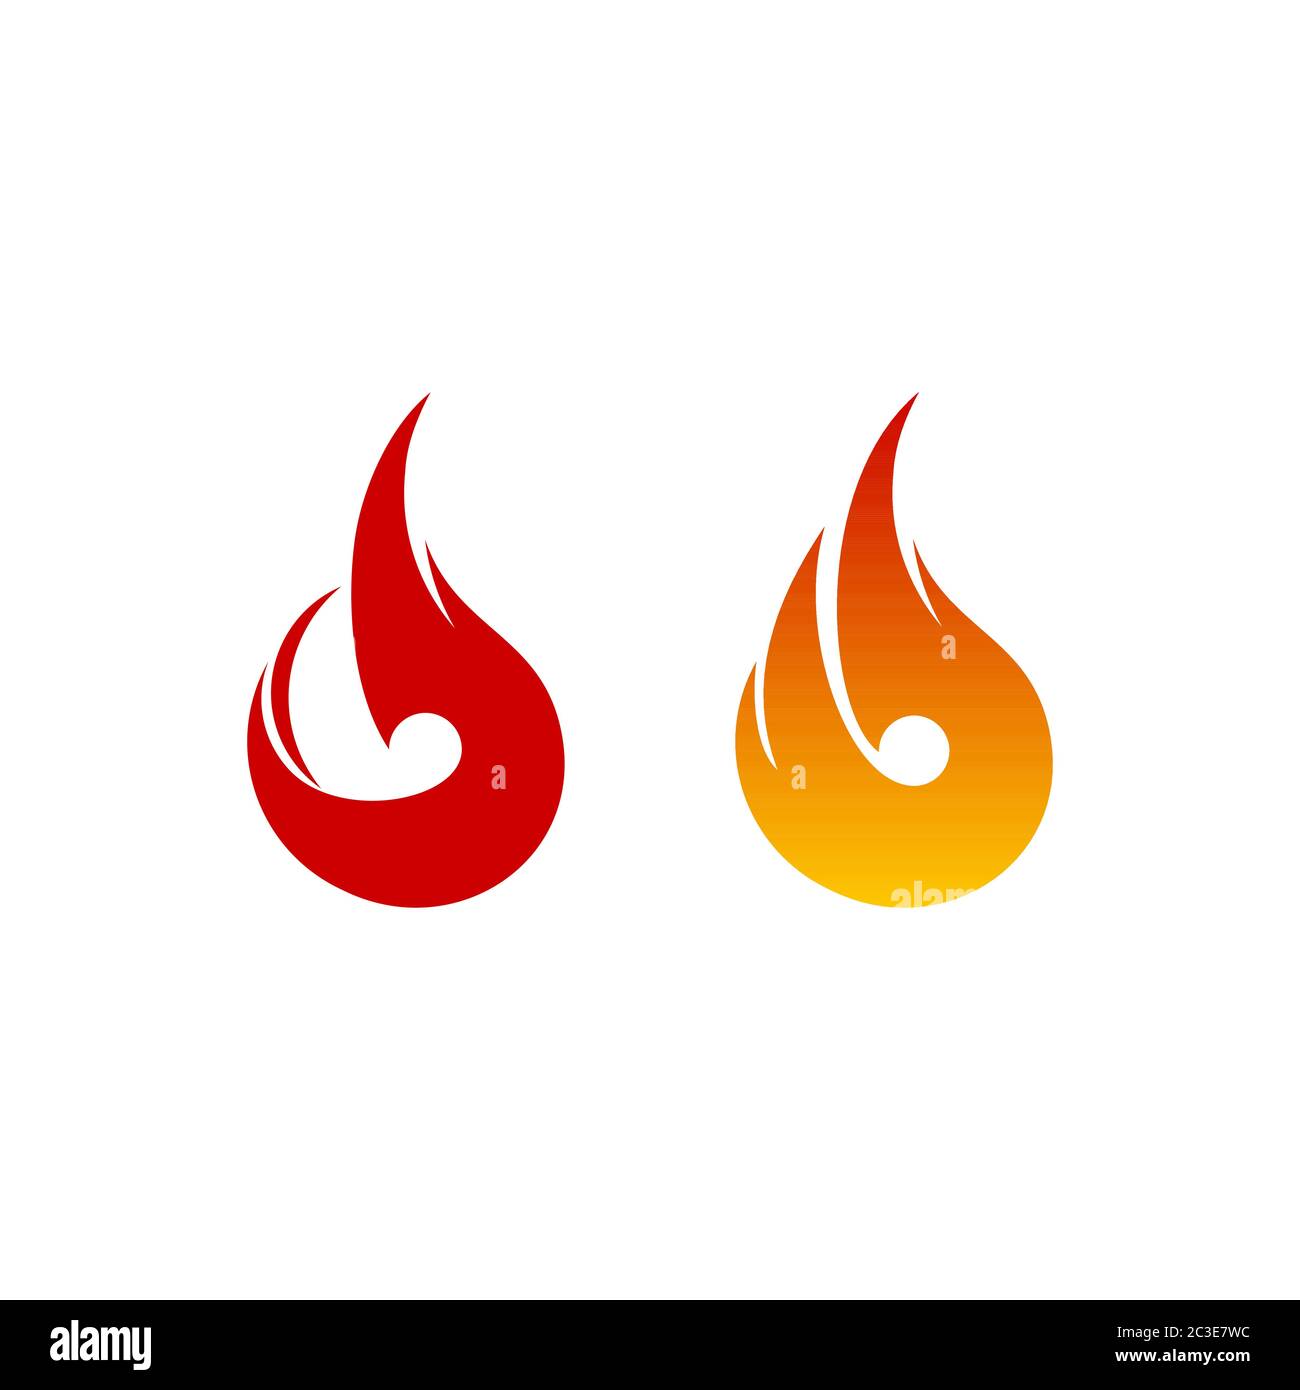 Abstract creative fire logo design concept, isolated on white background. Stock Vector